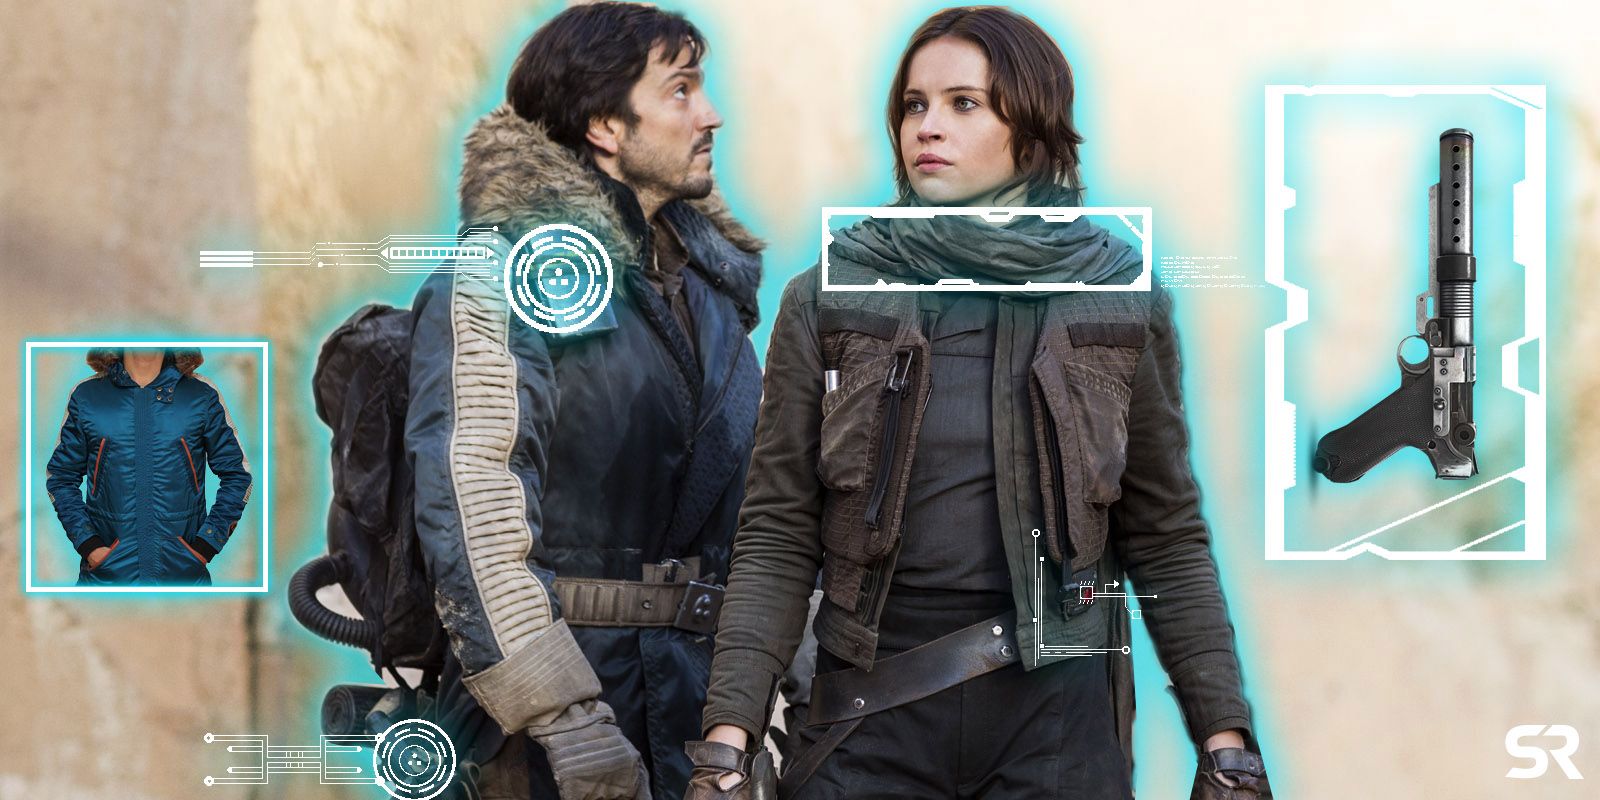 Star Wars Cosplay - Rogue One's Cassian and Jyn